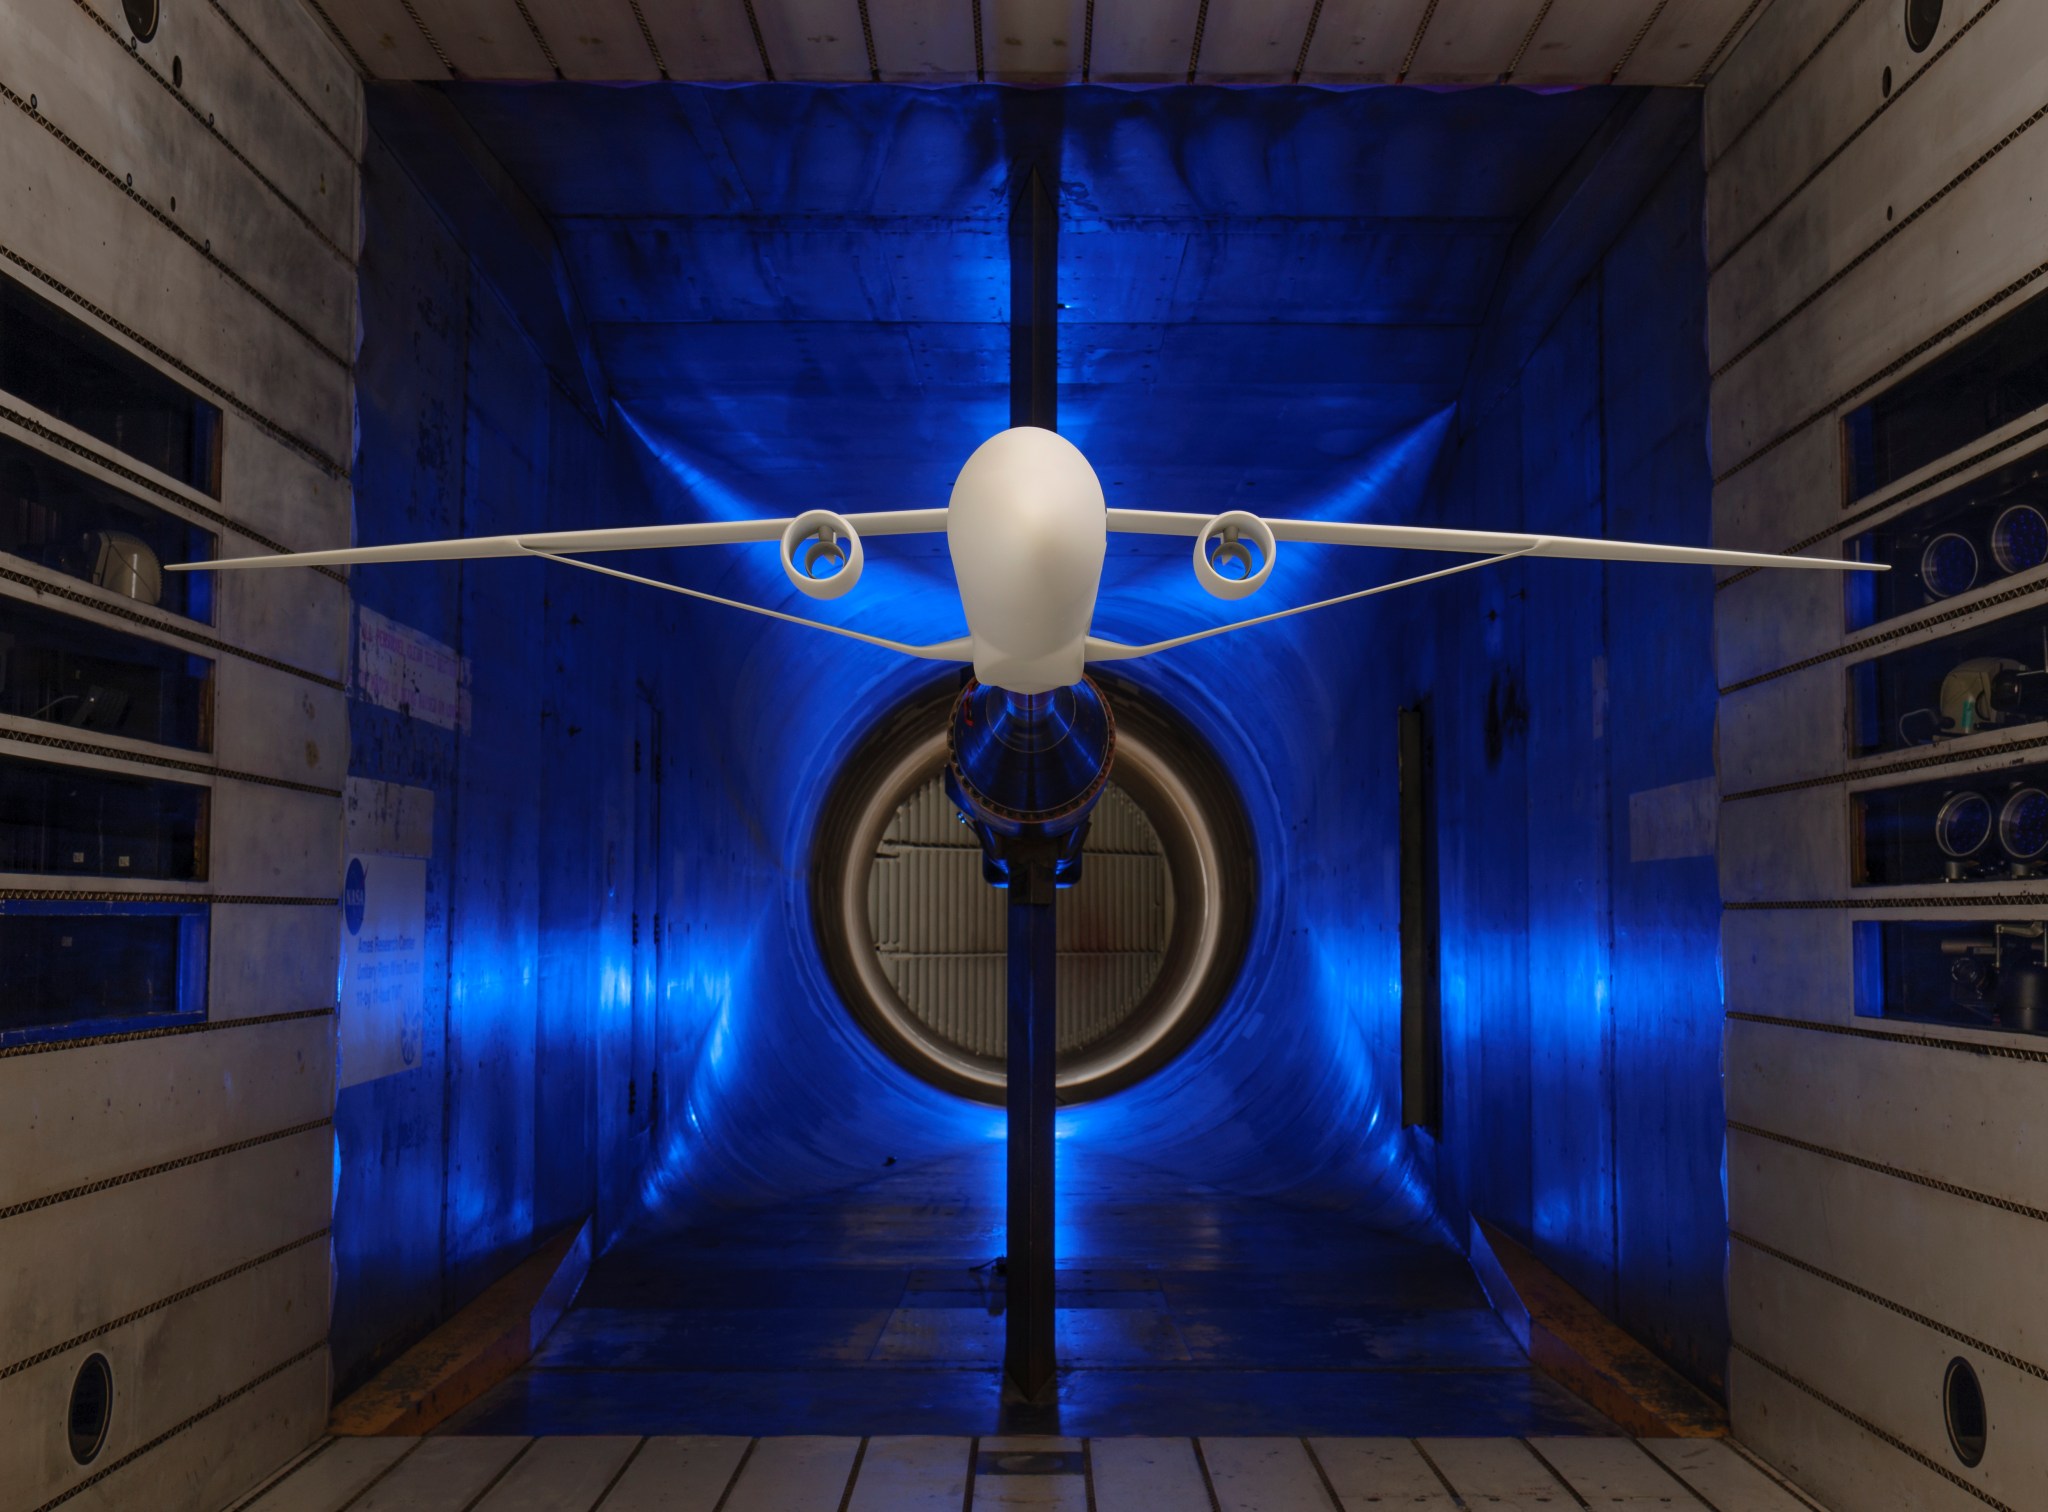 A scale model of an airplane with long and skinny wings supported by a truss is suspended within a wind tunnel for testing. The four walls of the wind tunnel are silver with a blue light illuminating the background.